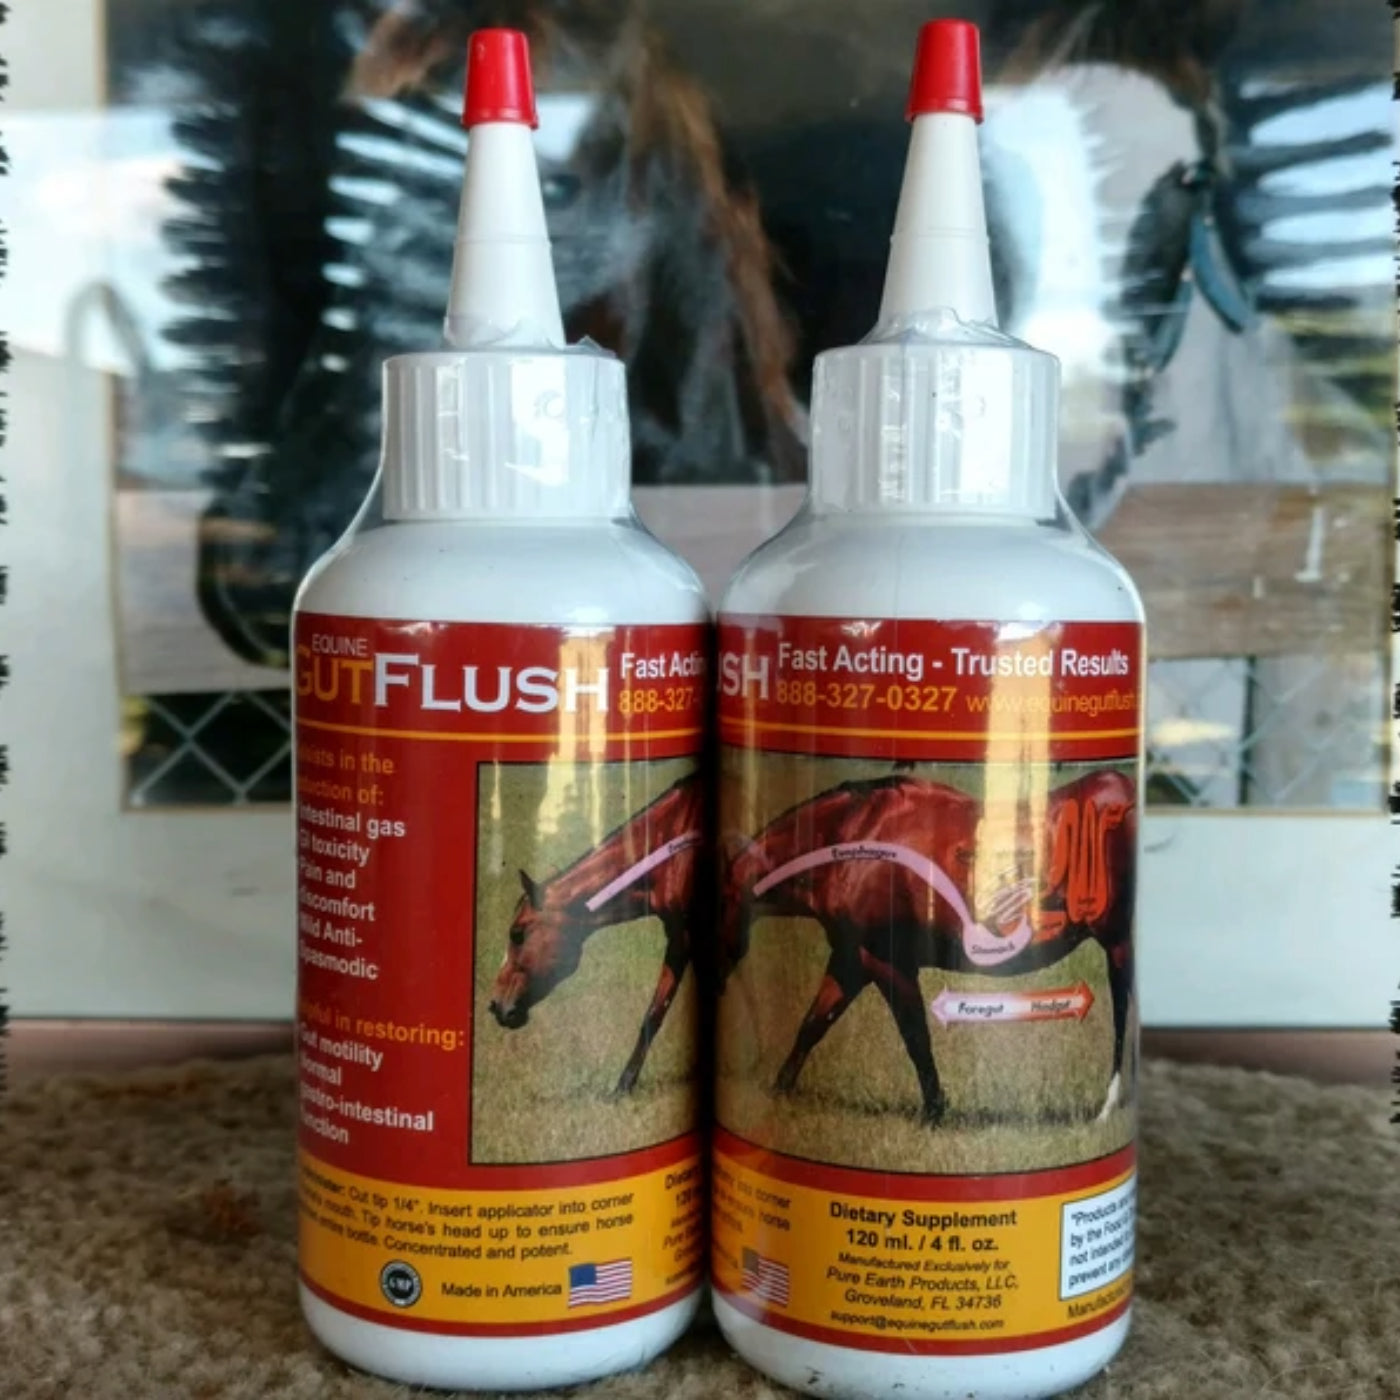 Equine gut flush, the best natural remedy for colic in horses